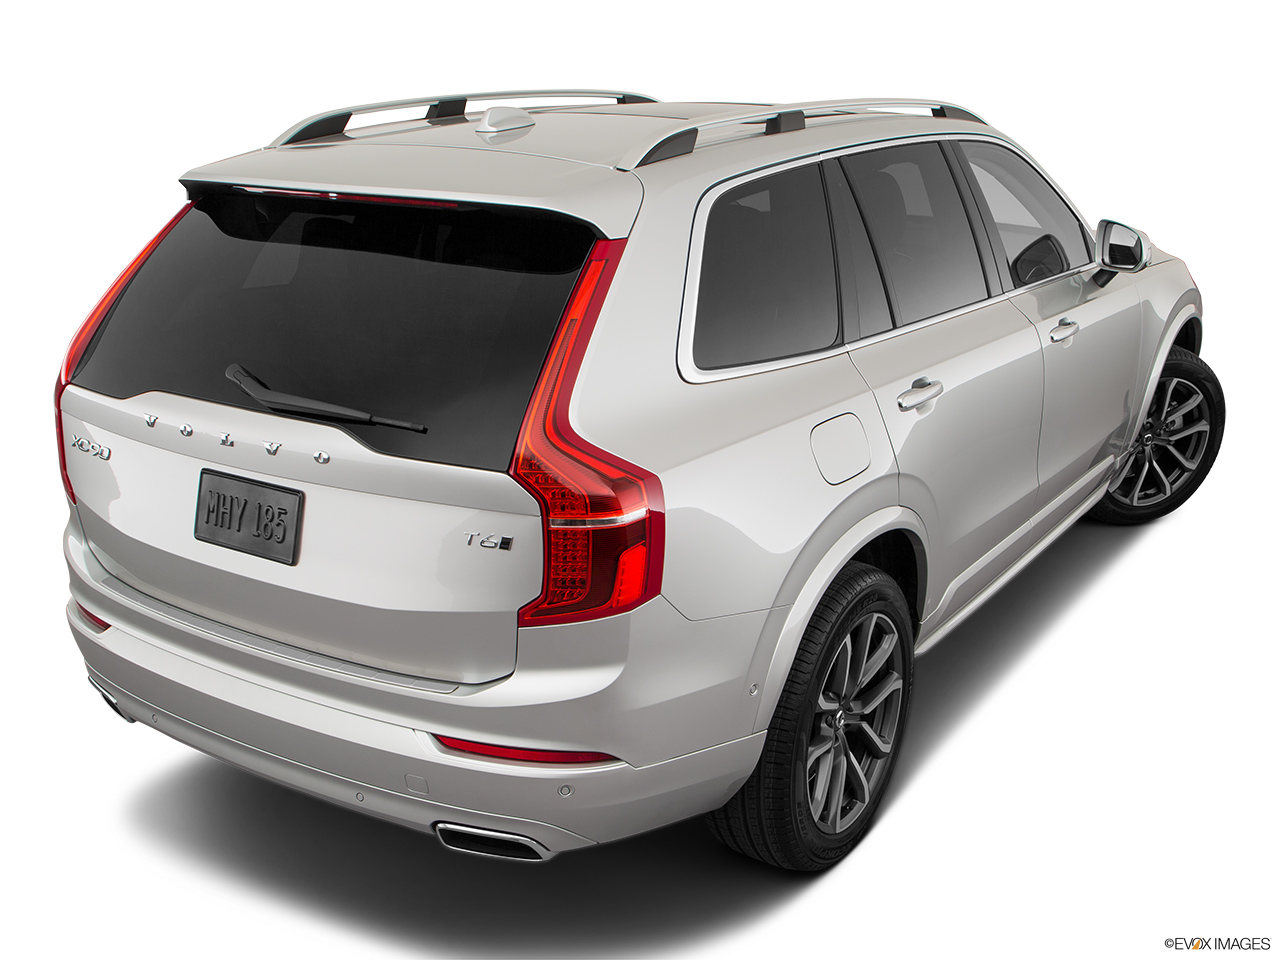 2019 Volvo XC90  T6 Momentum Rear 3/4 angle view. 